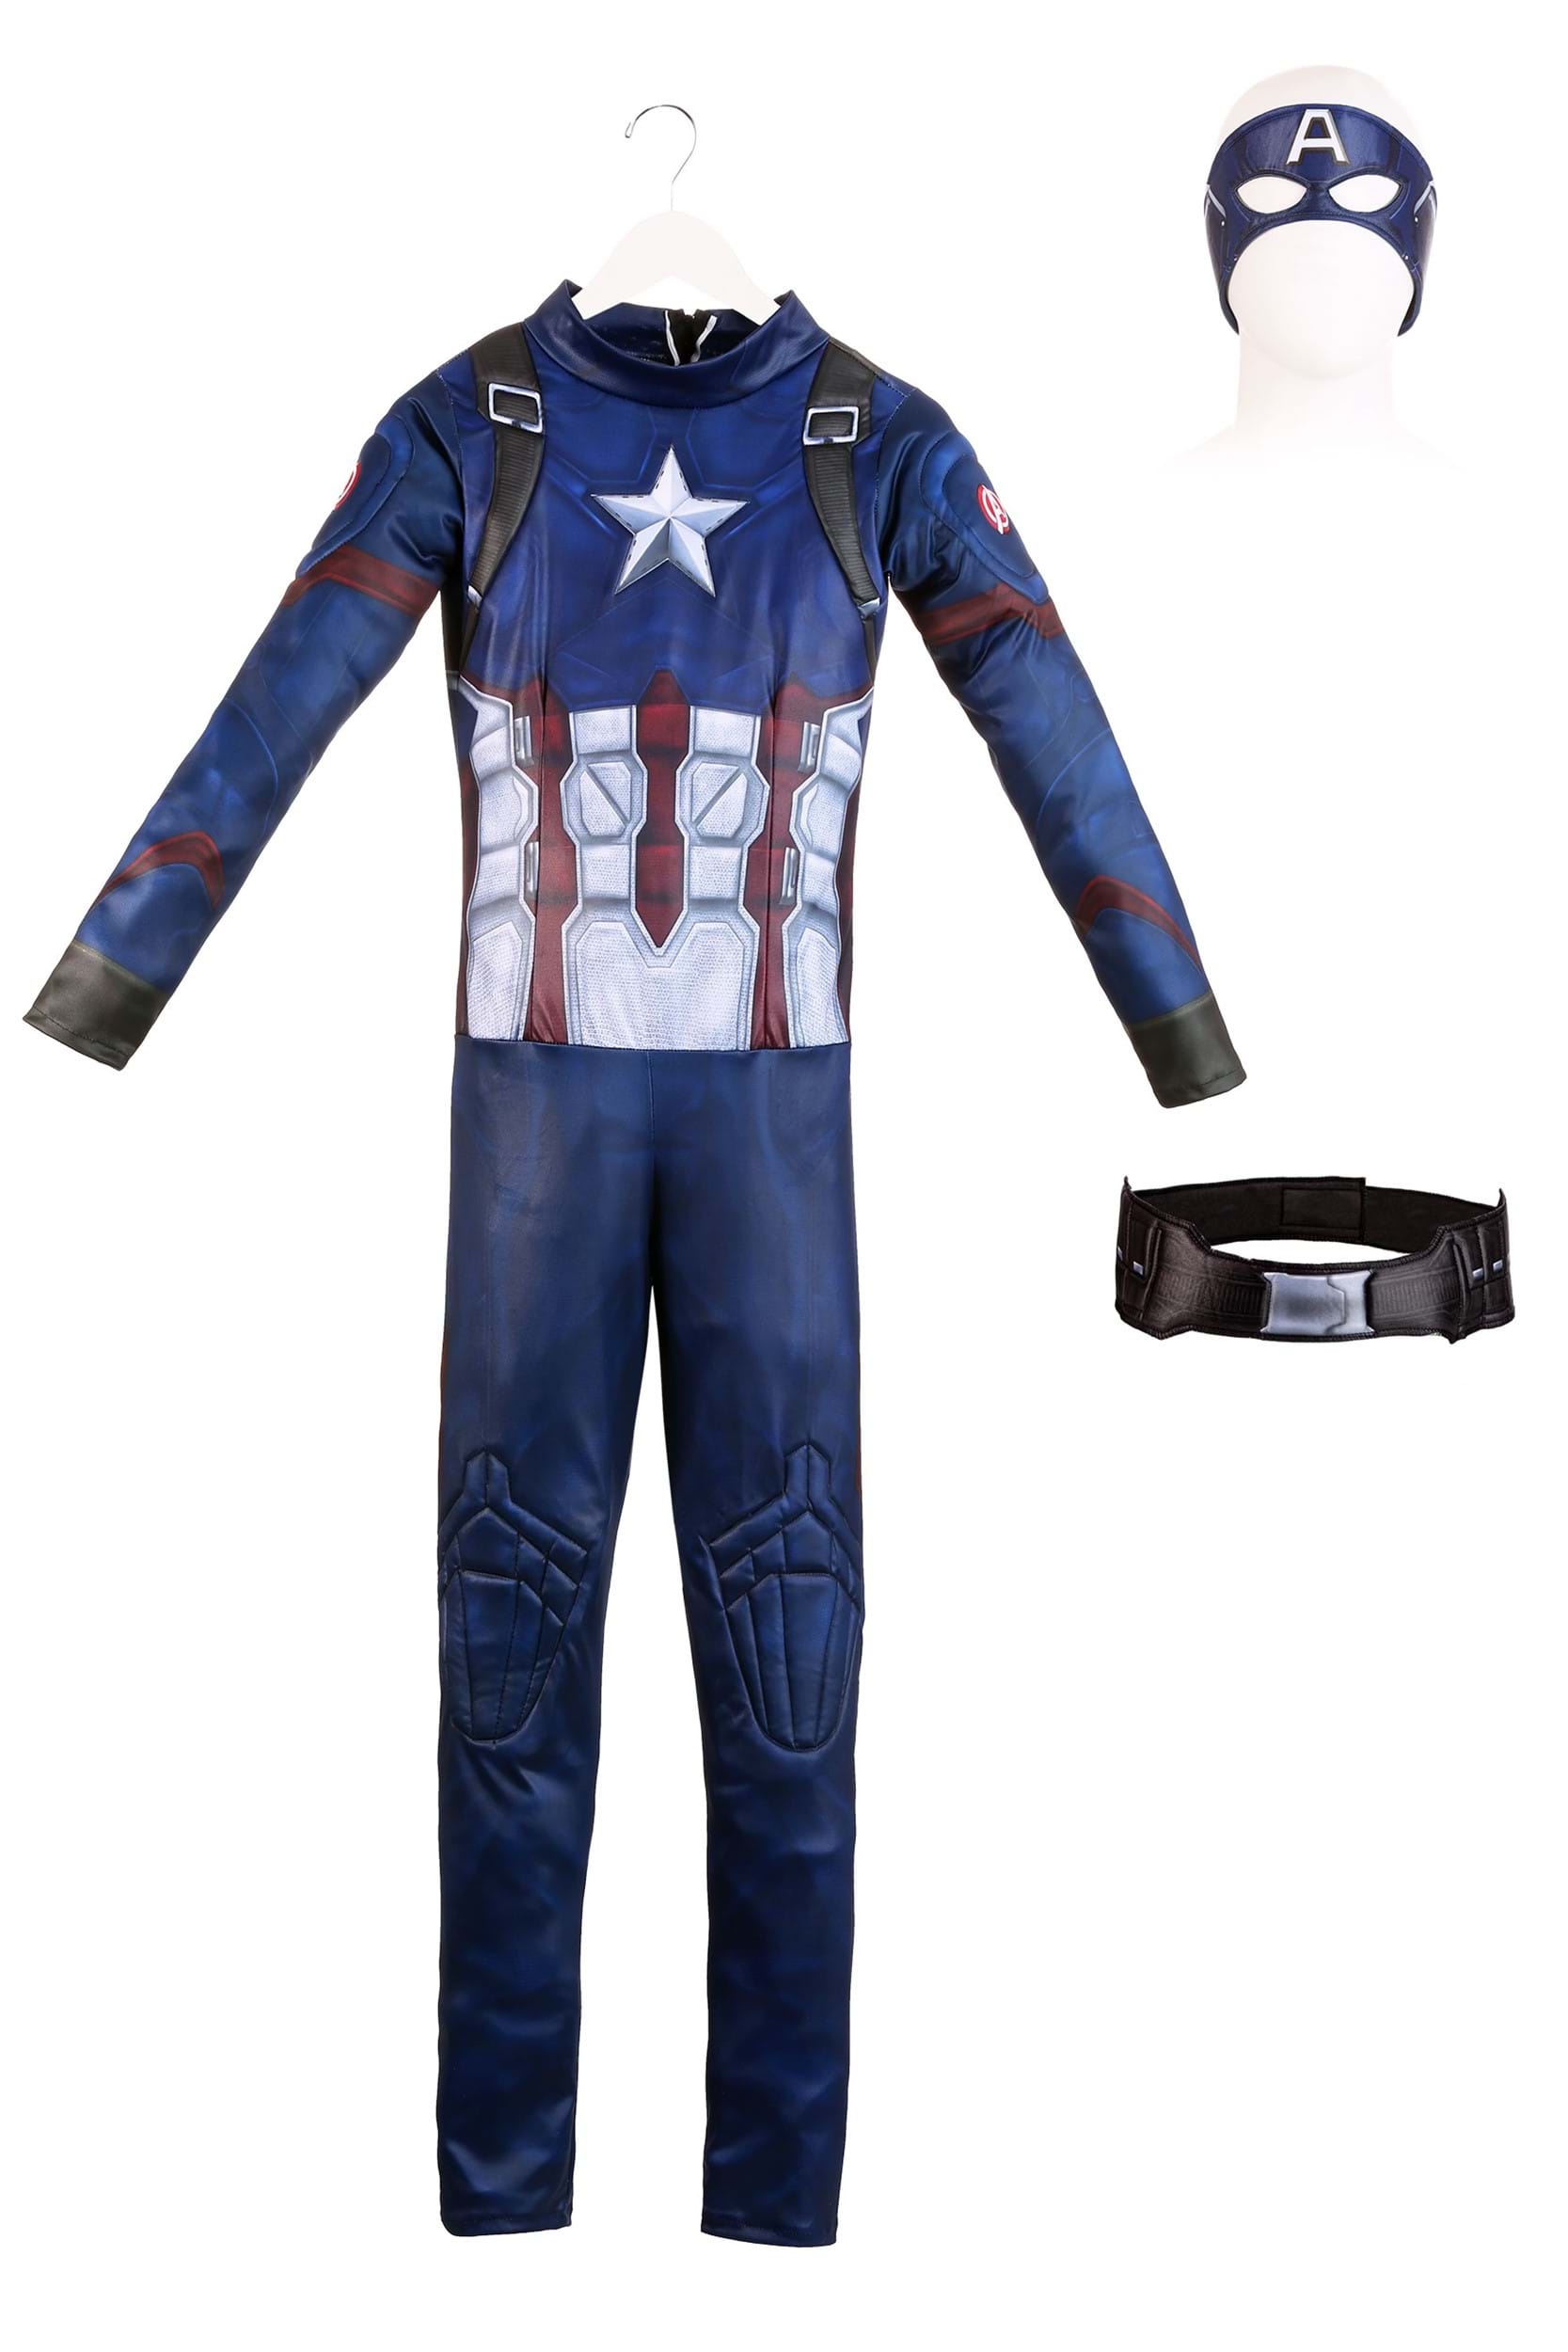 Captain America Costumes for Adults & Kids 